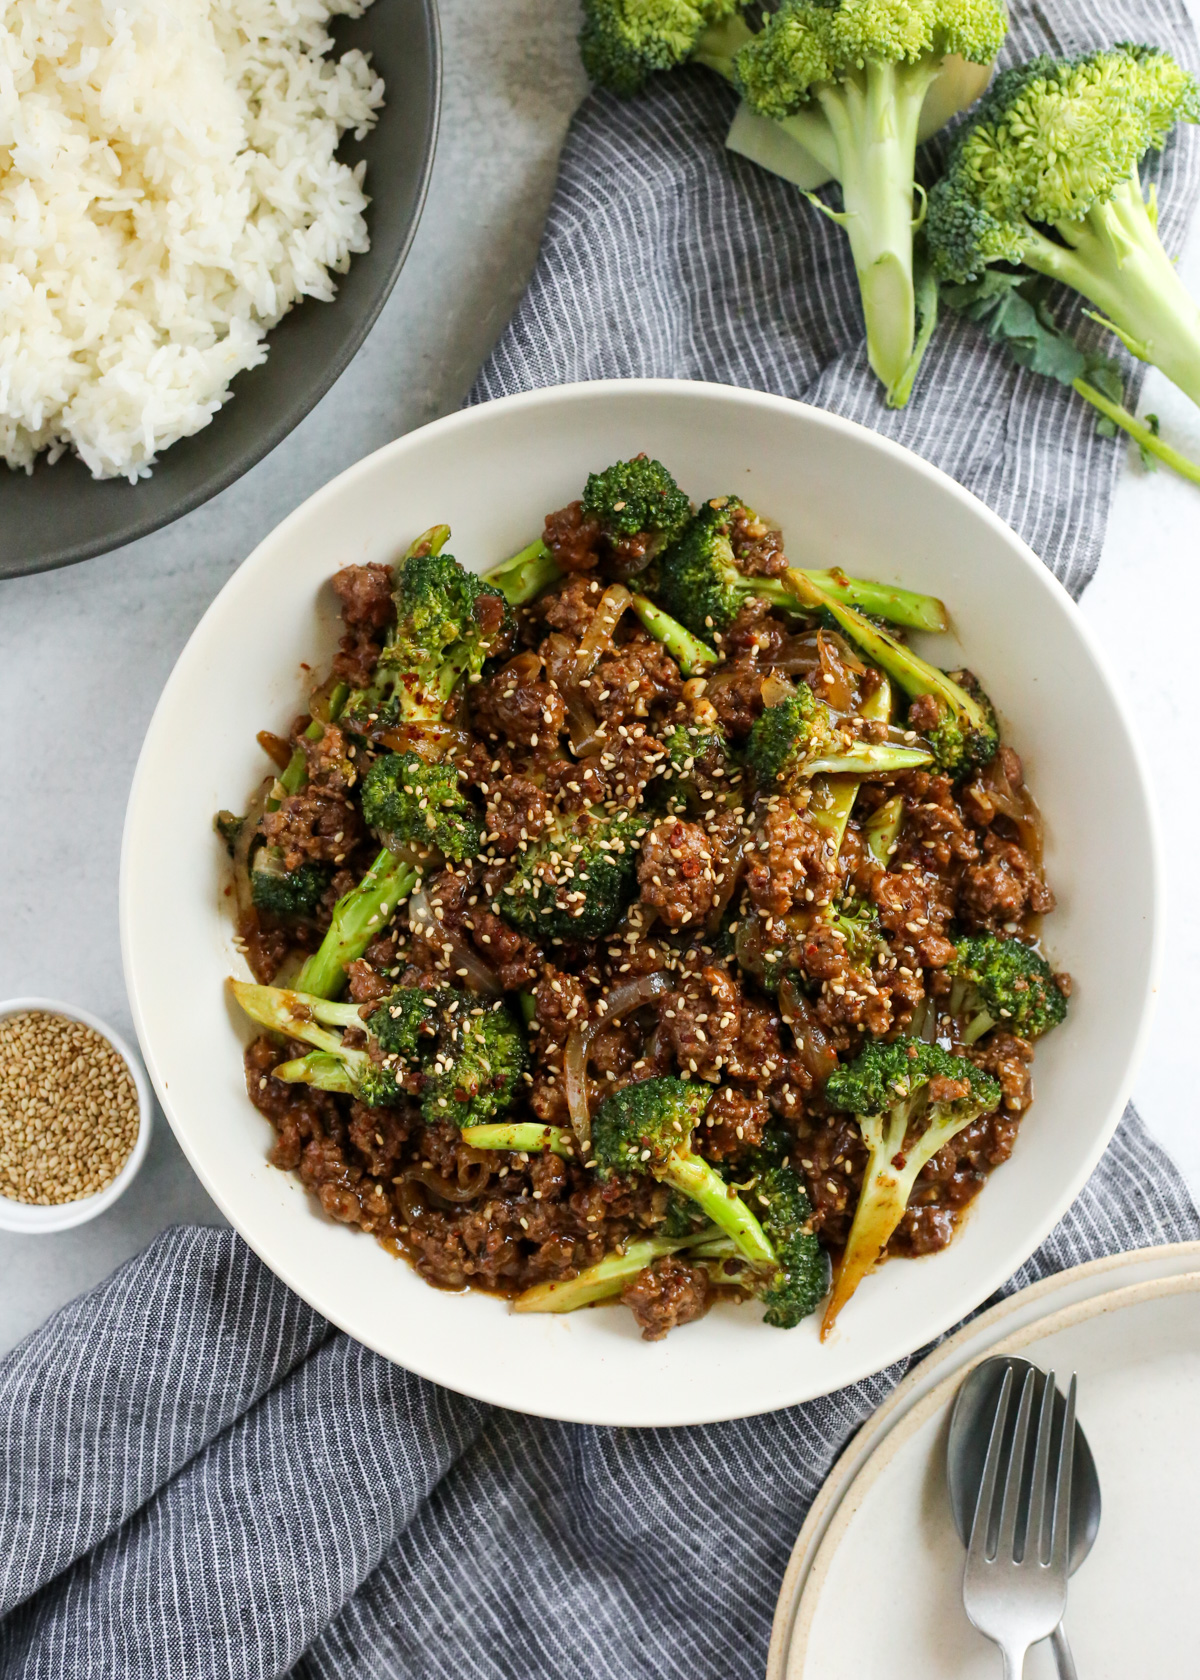 Overhead view of a serving bowl filled with ground beef and broccoli covered in a savory gravy-like sauce and garnished with toasted sesame seeds